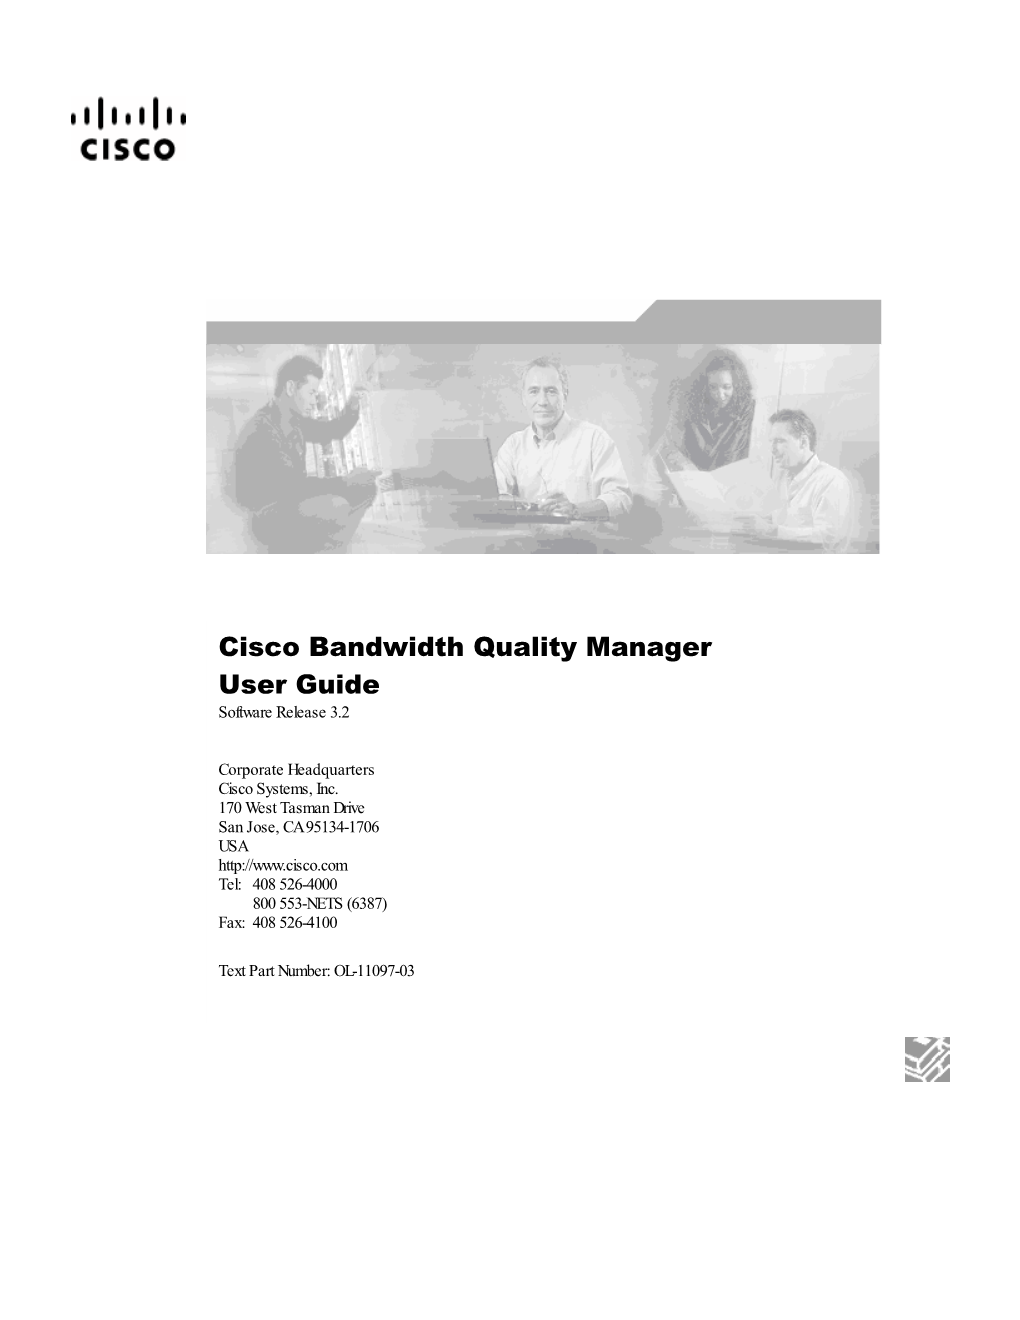 Cisco Bandwidth Quality Manager User Guide Software Release 3.2